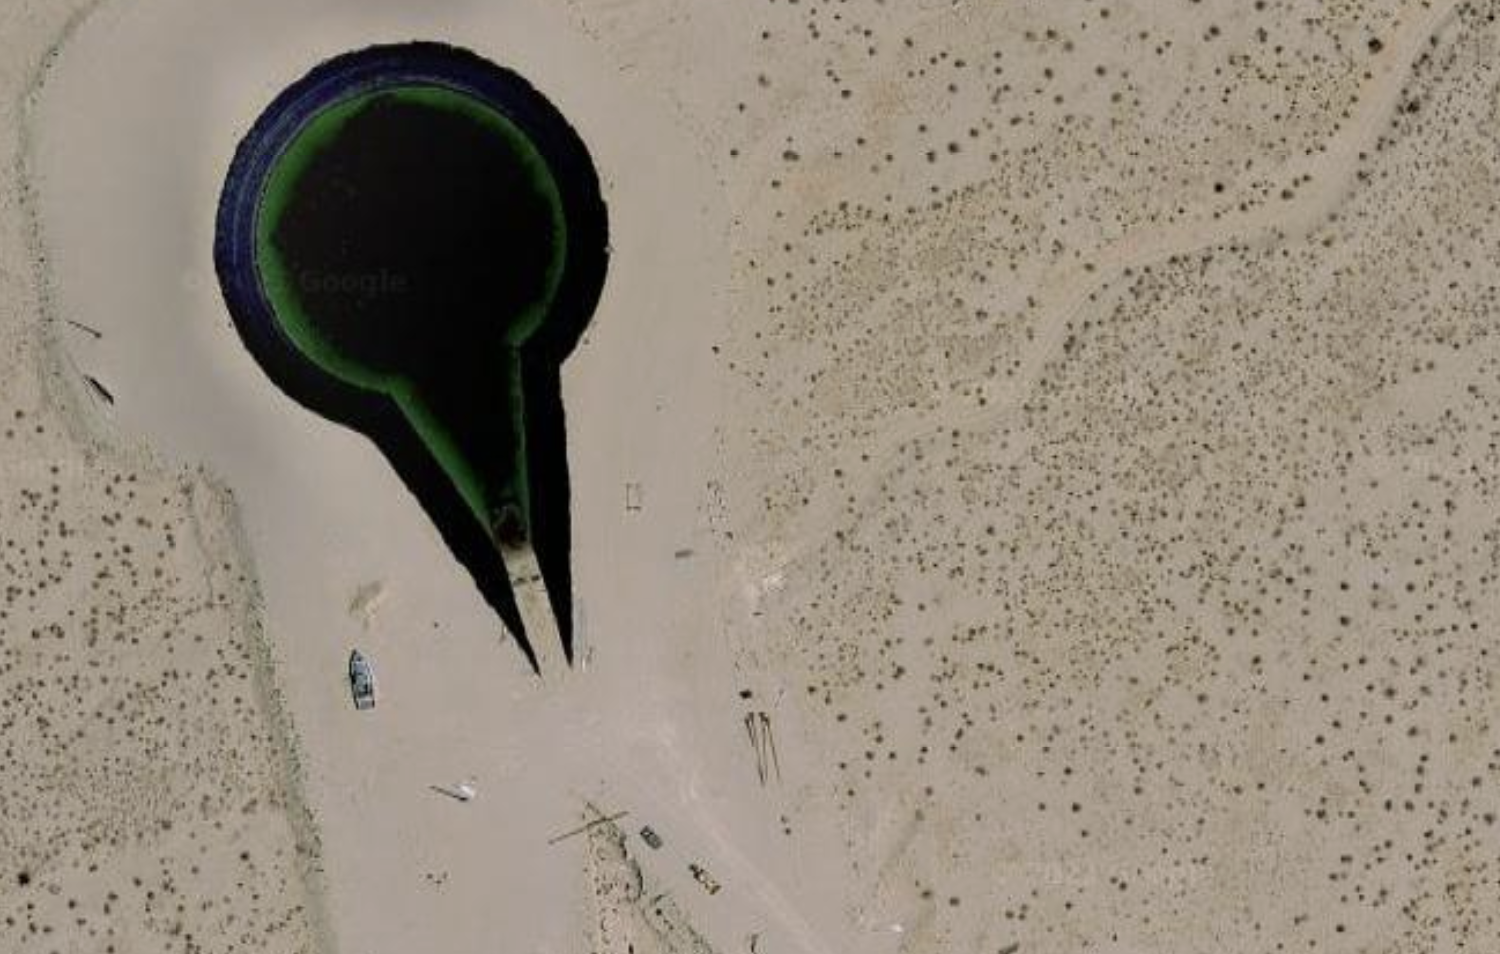 UFO Spotted On Google Maps With Tanks And Mystery Crashed Plane In The Desert